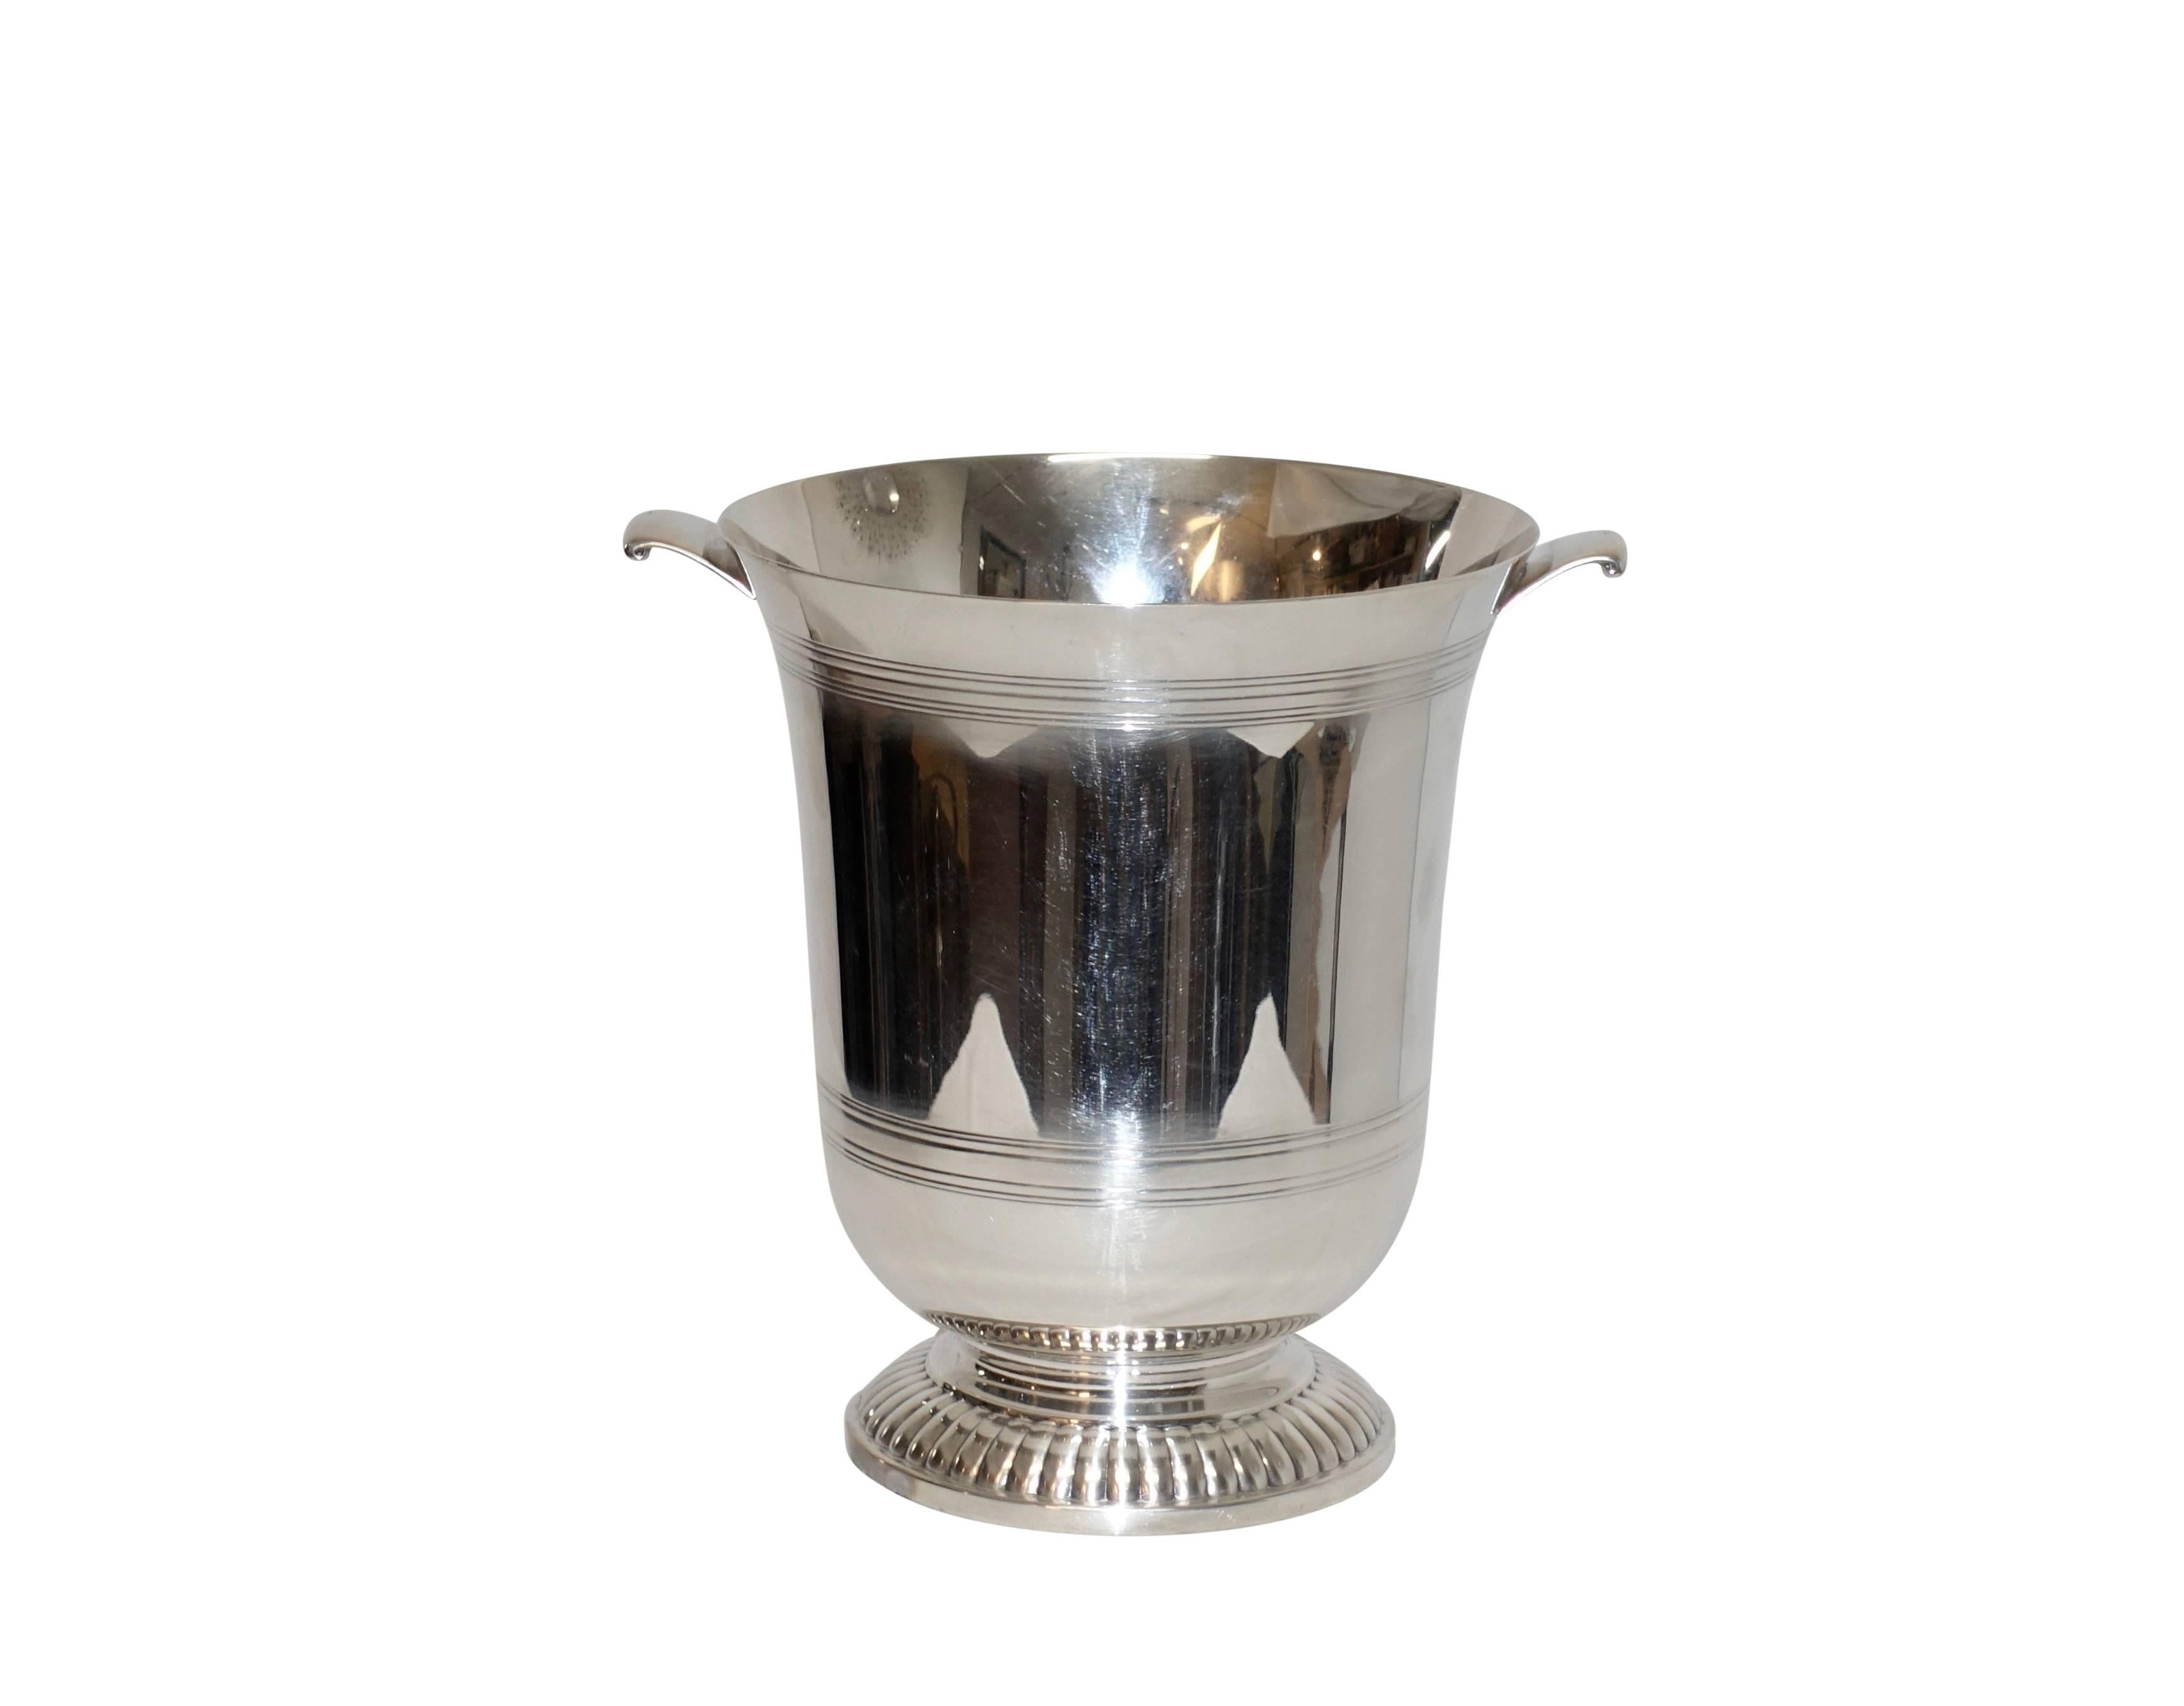 Understated elegance in the simplicity of the design on this sterling silver footed champagne/wine bucket or cooler, American, circa 1960.